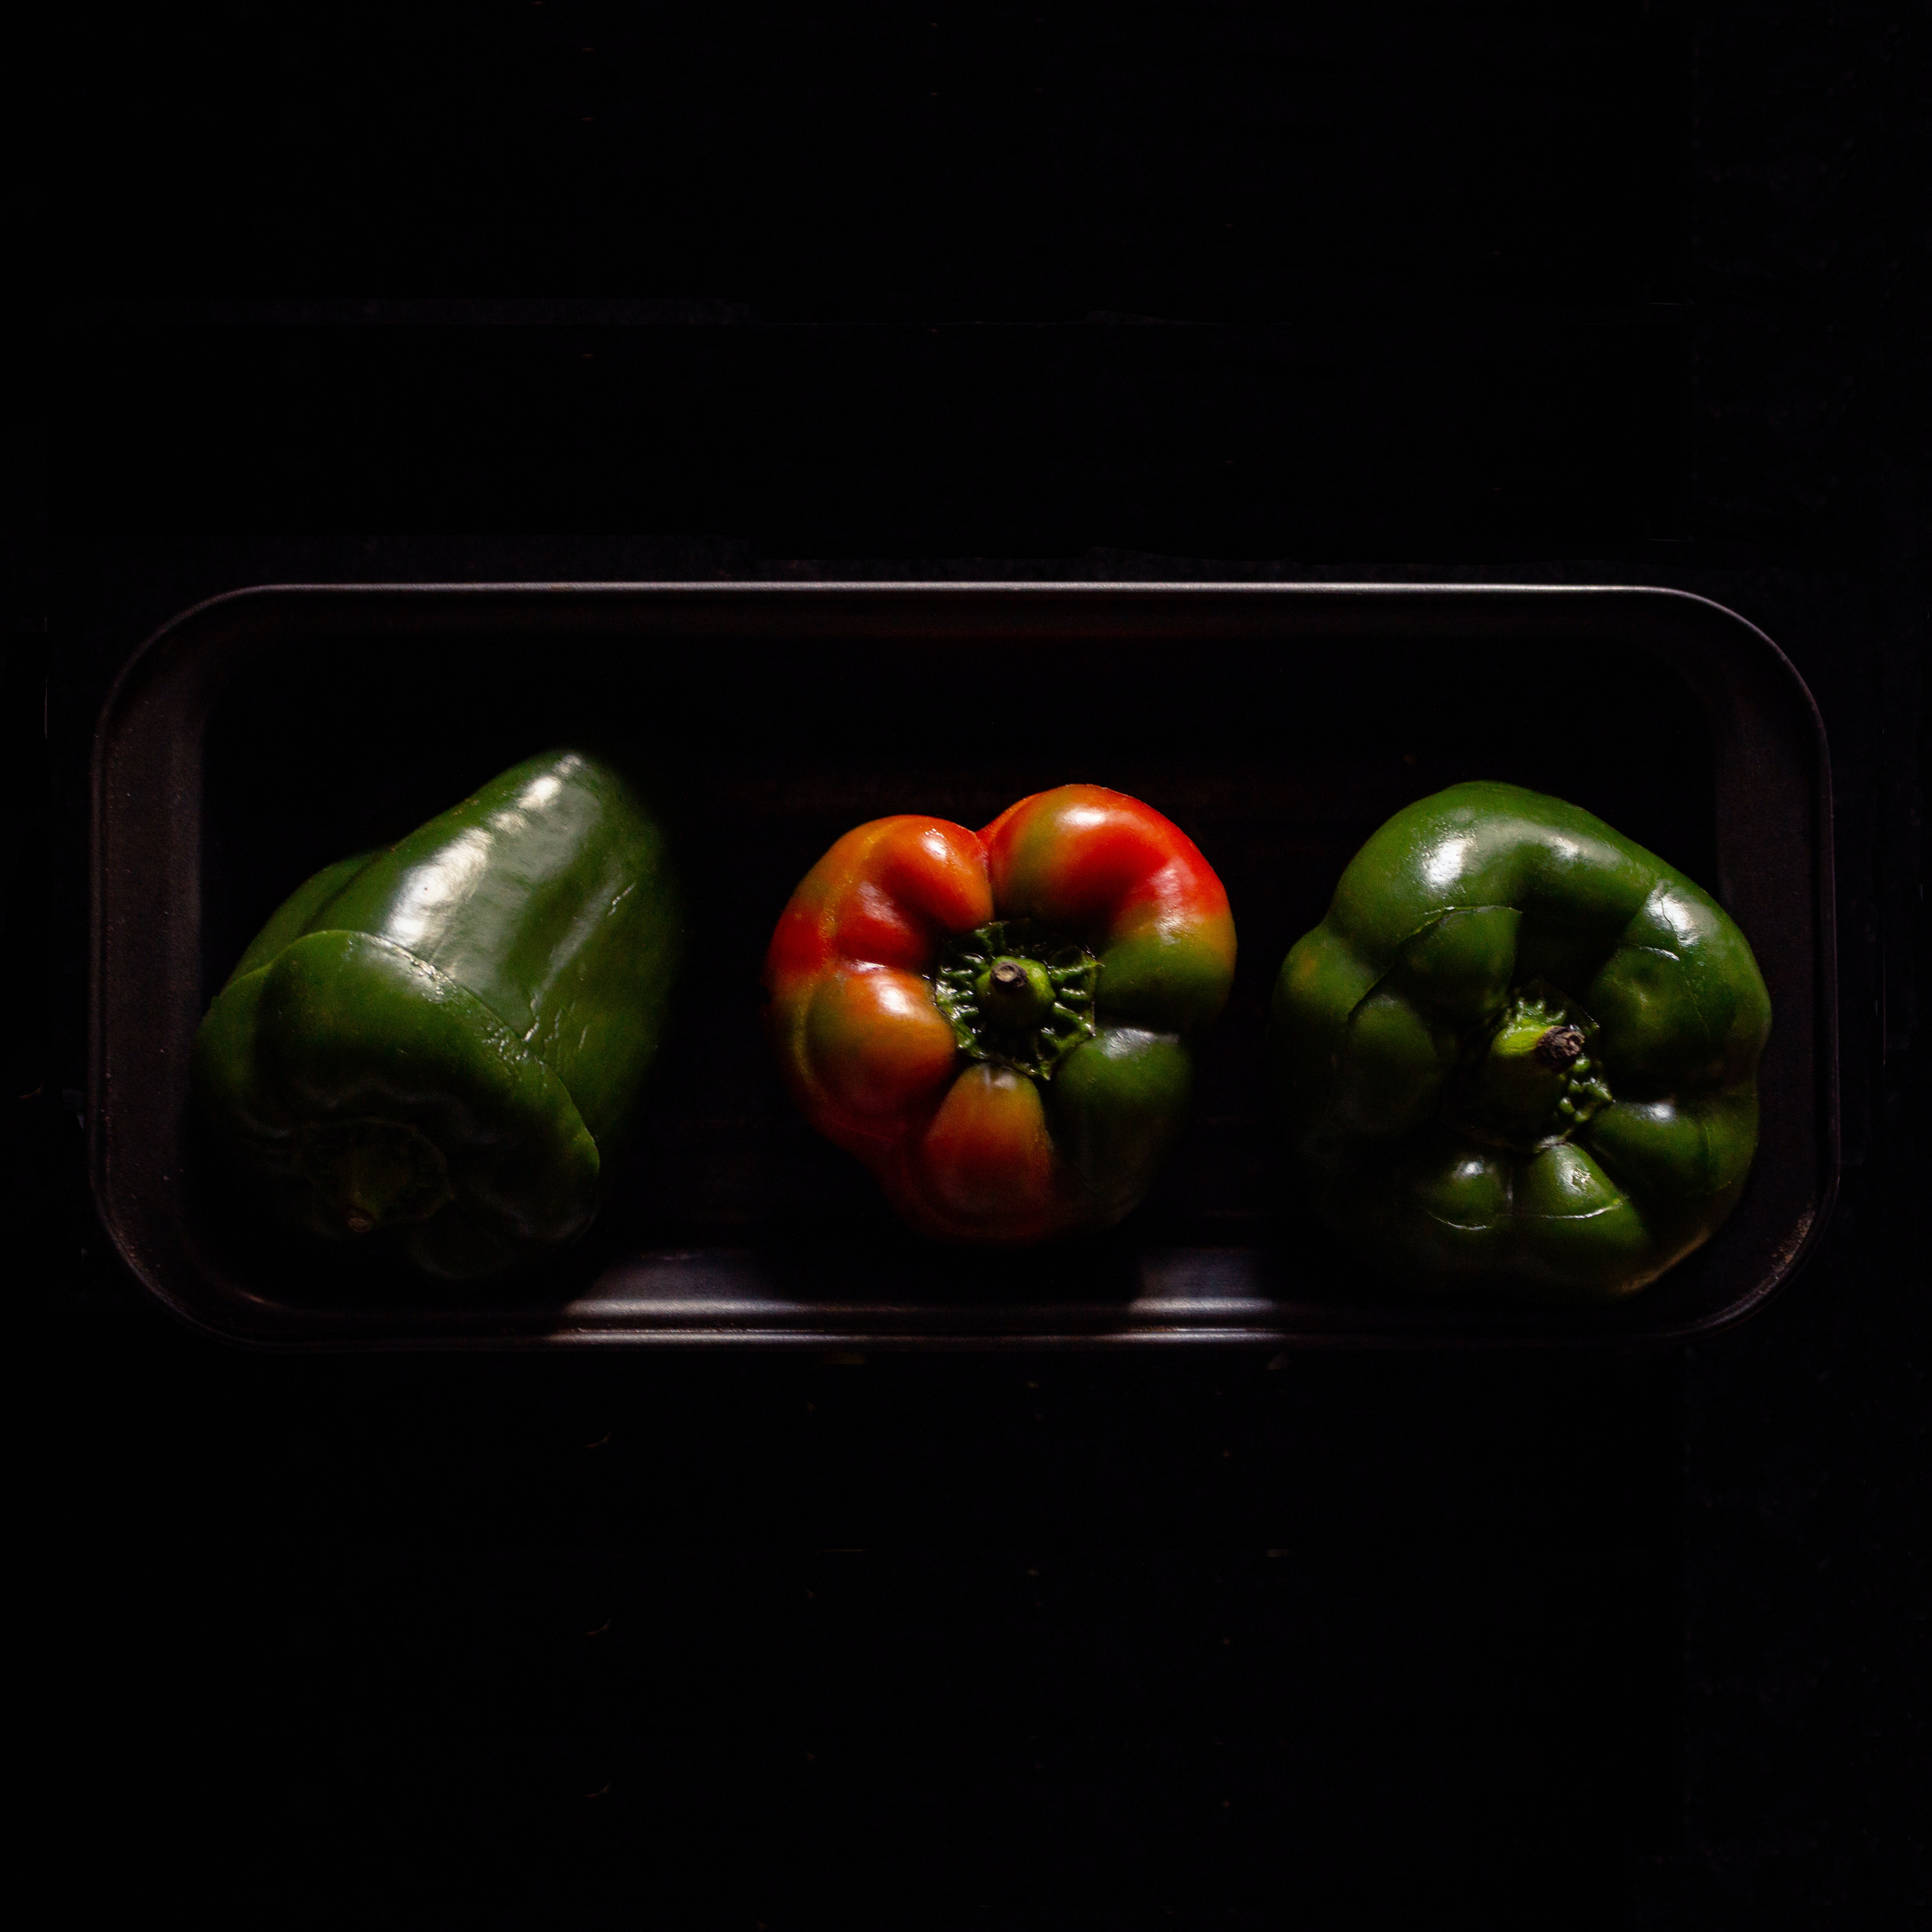 A photo of red and green peppers